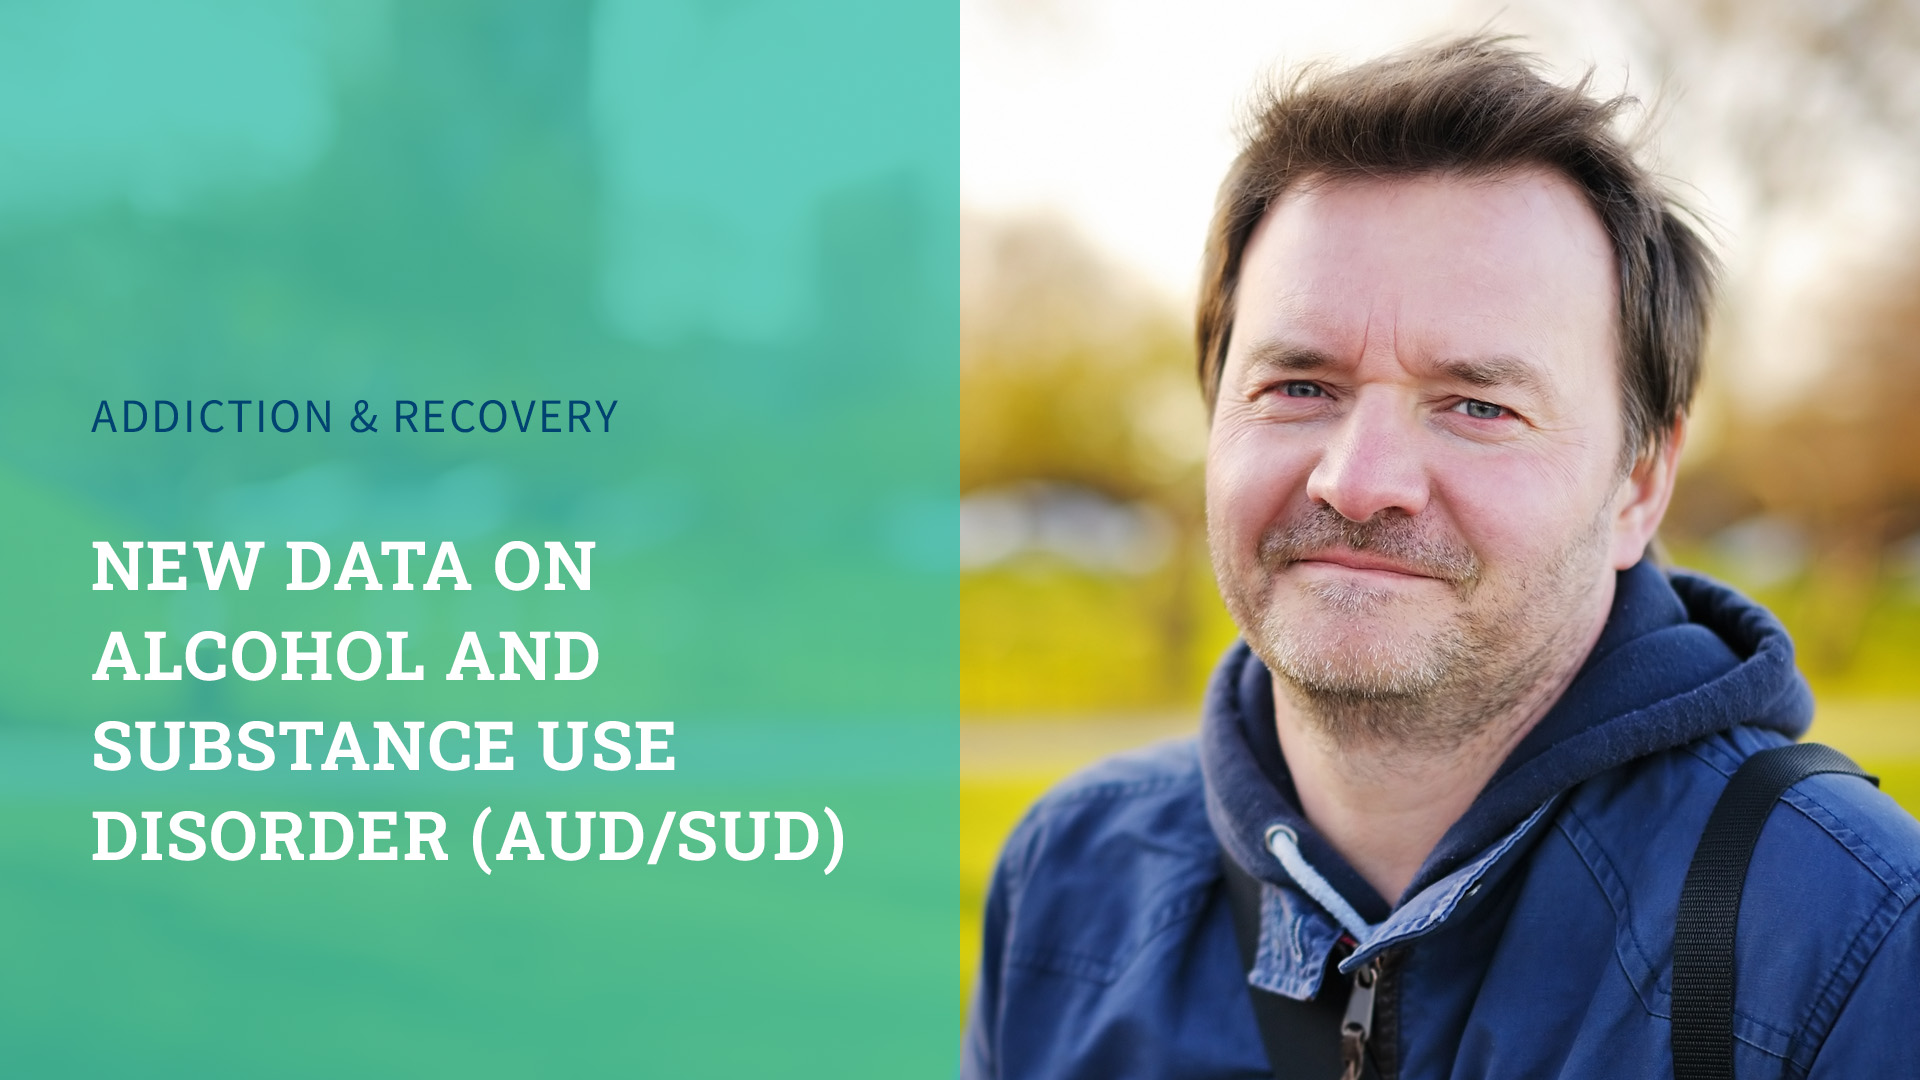 Research Report: New Data on Alcohol and Substance Use Disorder (AUD/SUD)